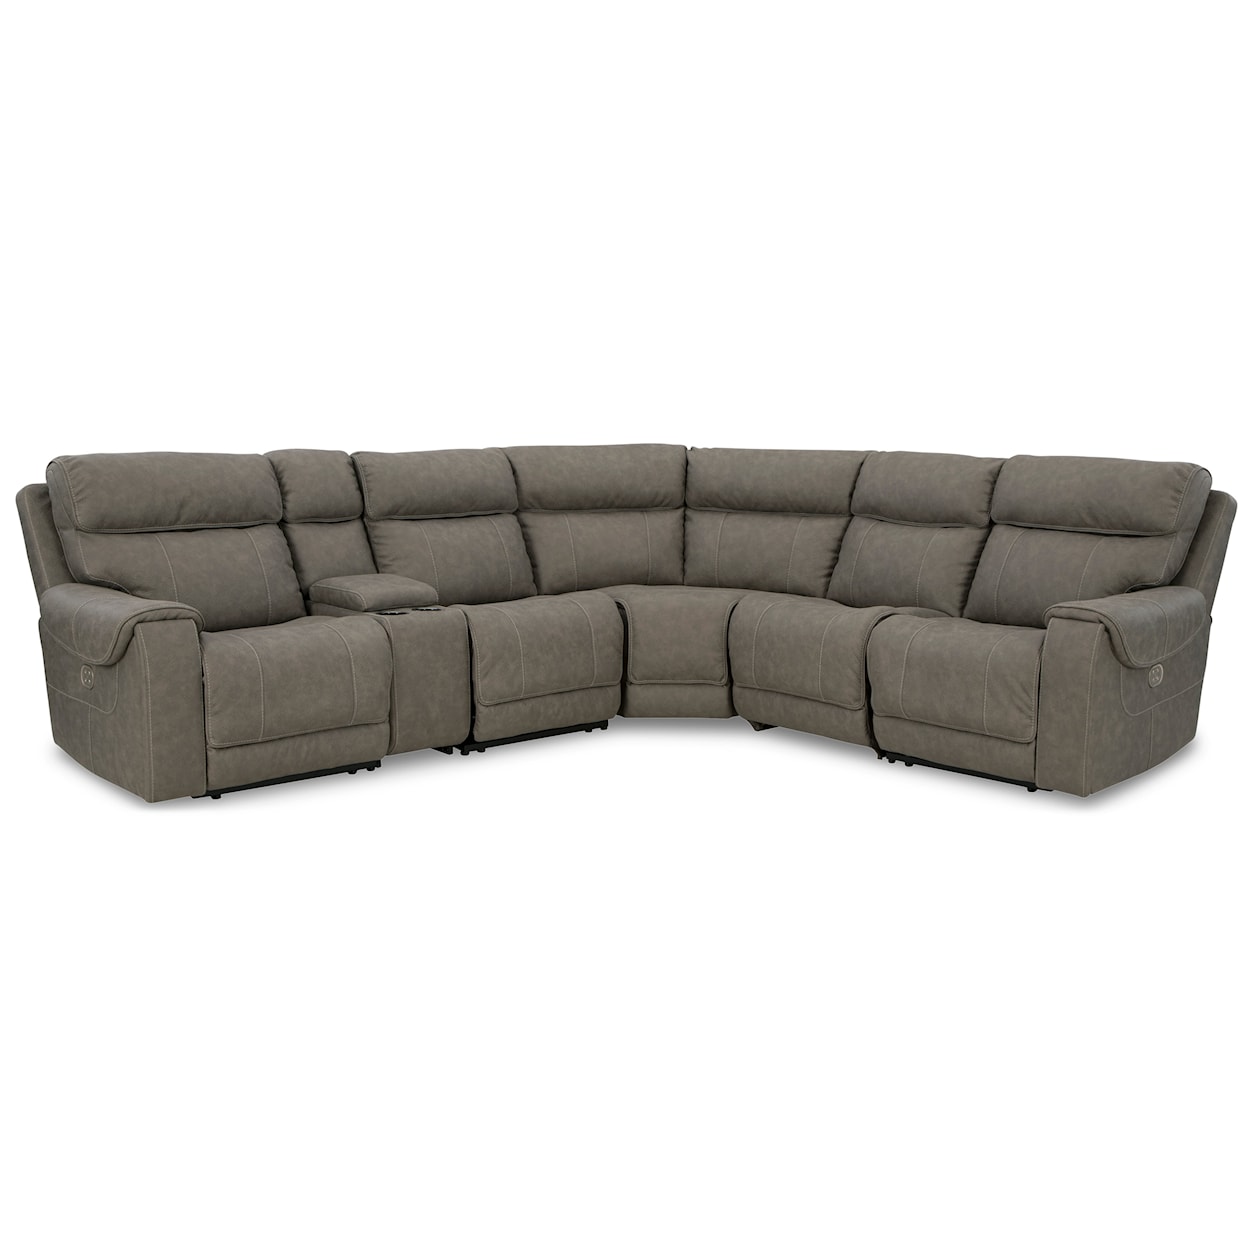 Signature Design by Ashley Starbot 6-Piece Power Reclining Sectional